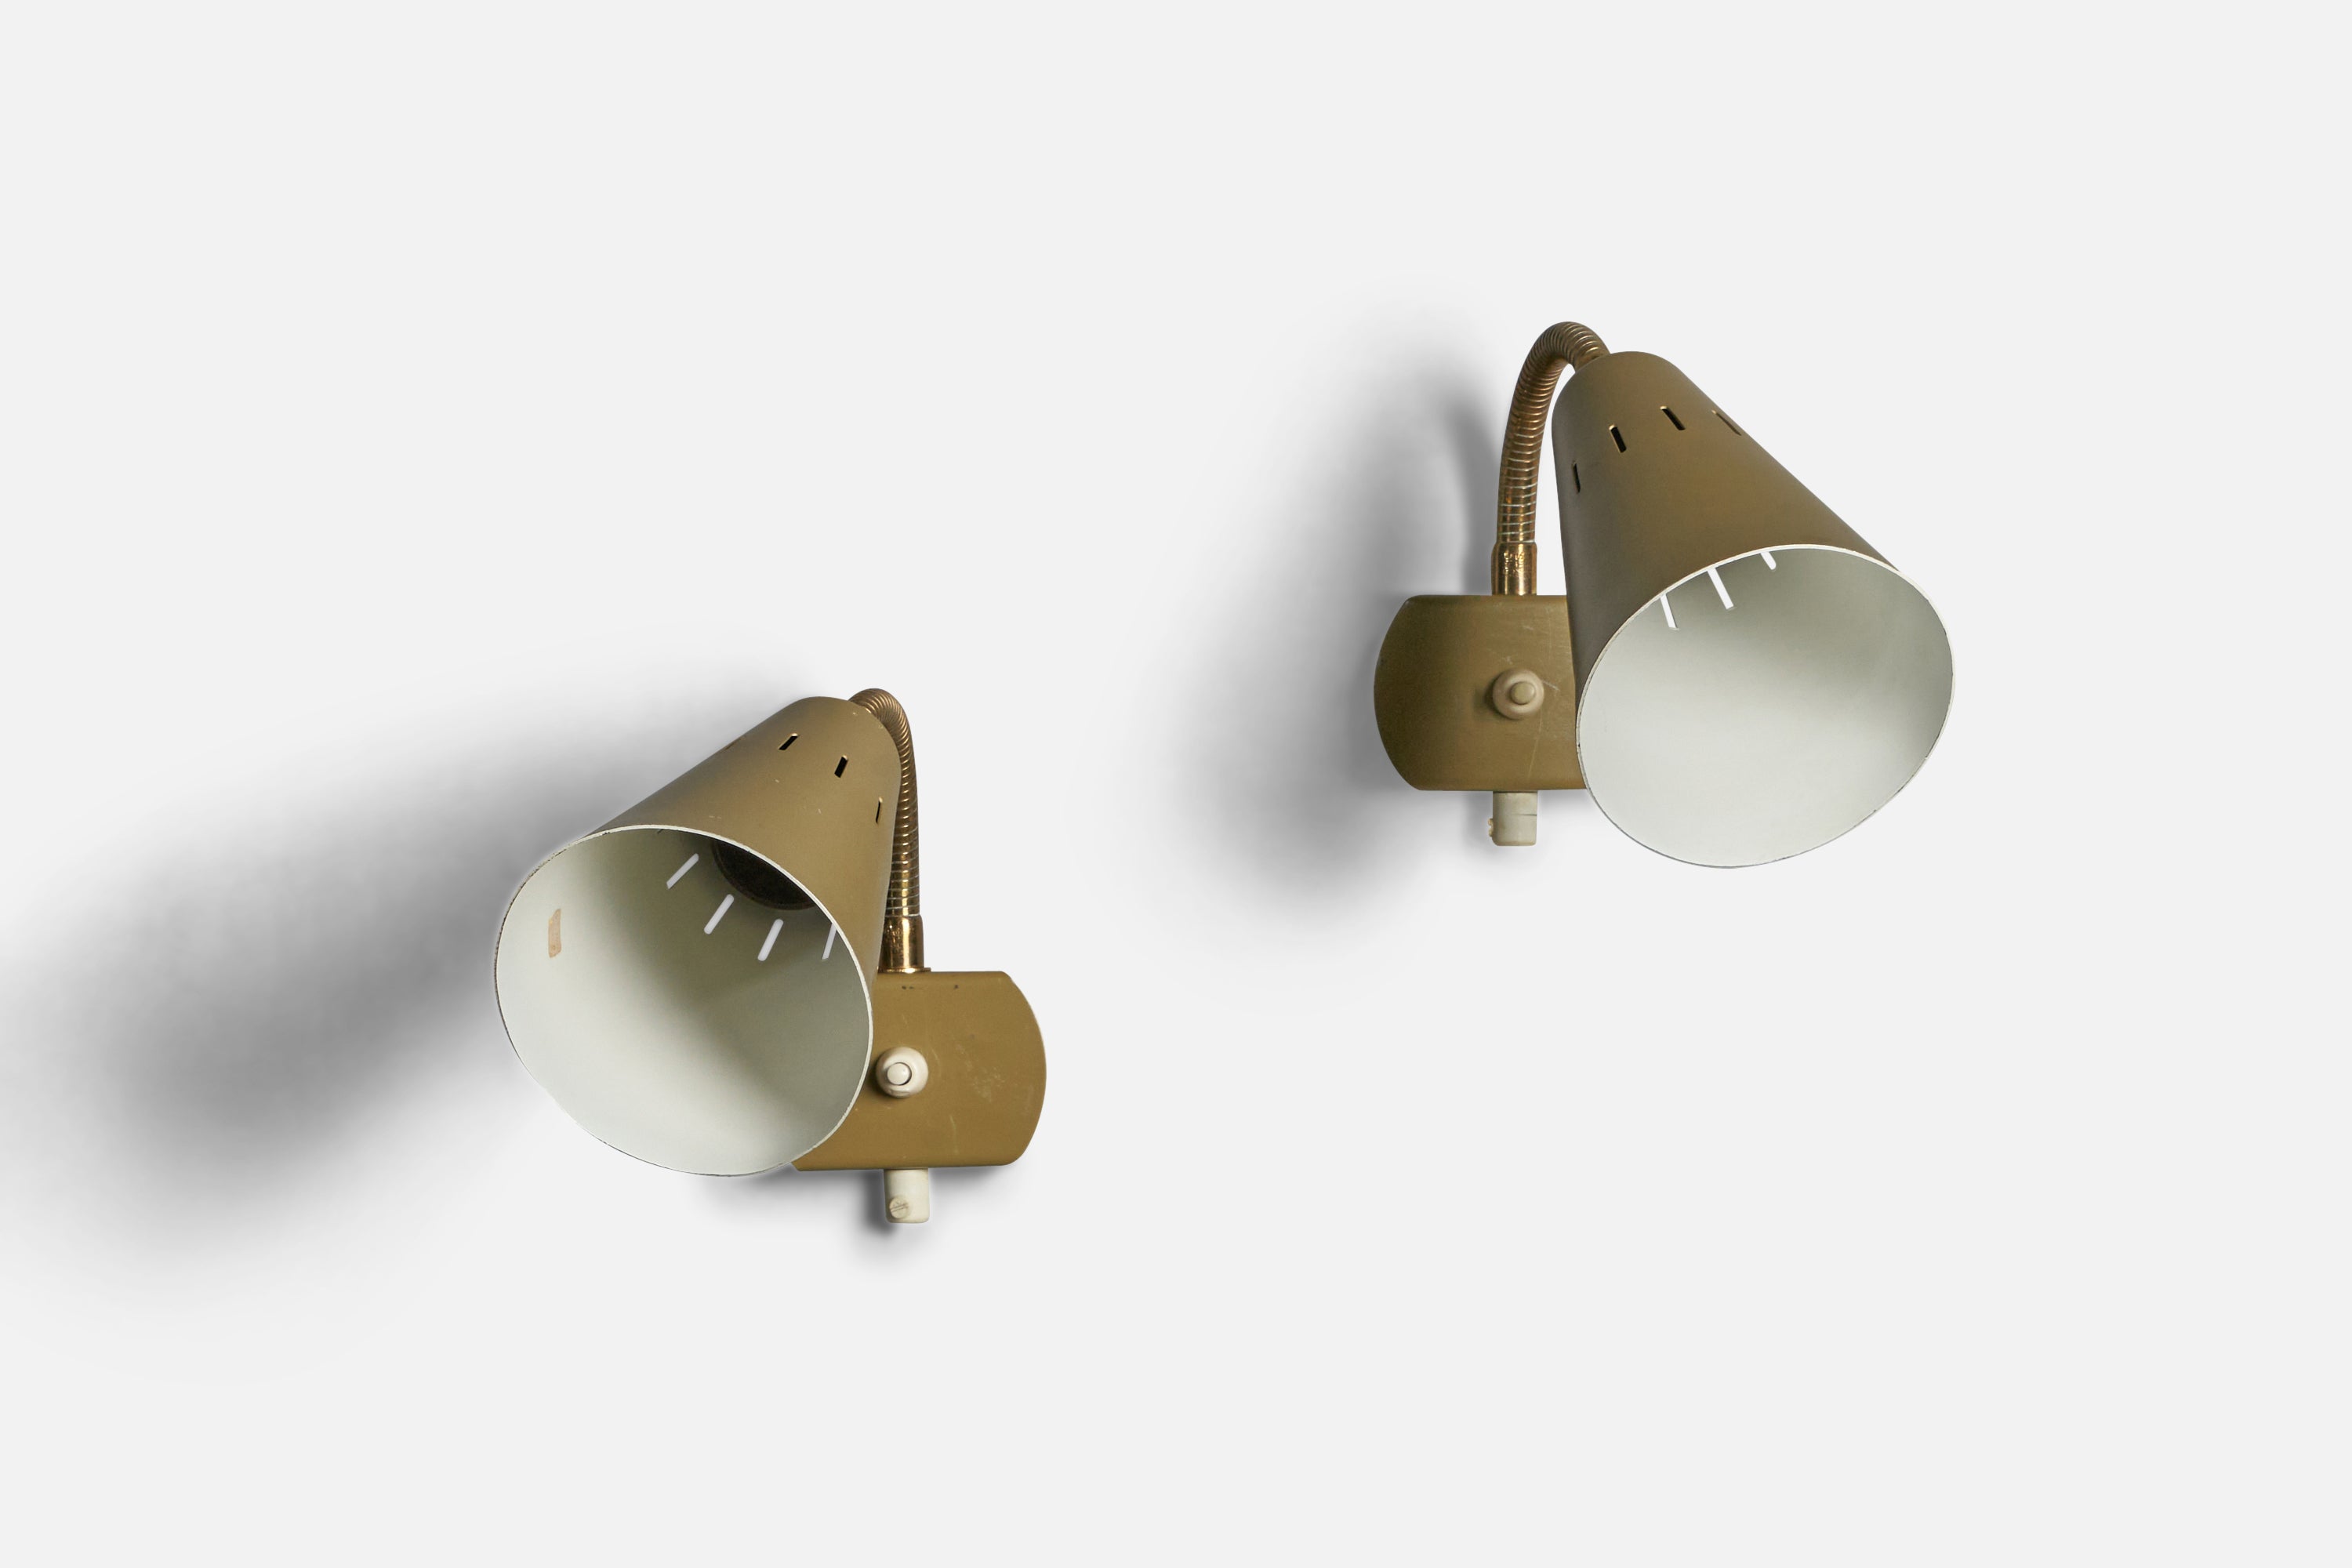 A pair of adjustable brass and beige white lacquered metal wall lights, designed and produced in Sweden, c. 1960s.

Overall Dimensions (inches): 8” H x 4” W x 9” D
Back Plate Dimensions (inches): 2.25” H x 3.5” W x 0.75” D
Bulb Specifications: E-26